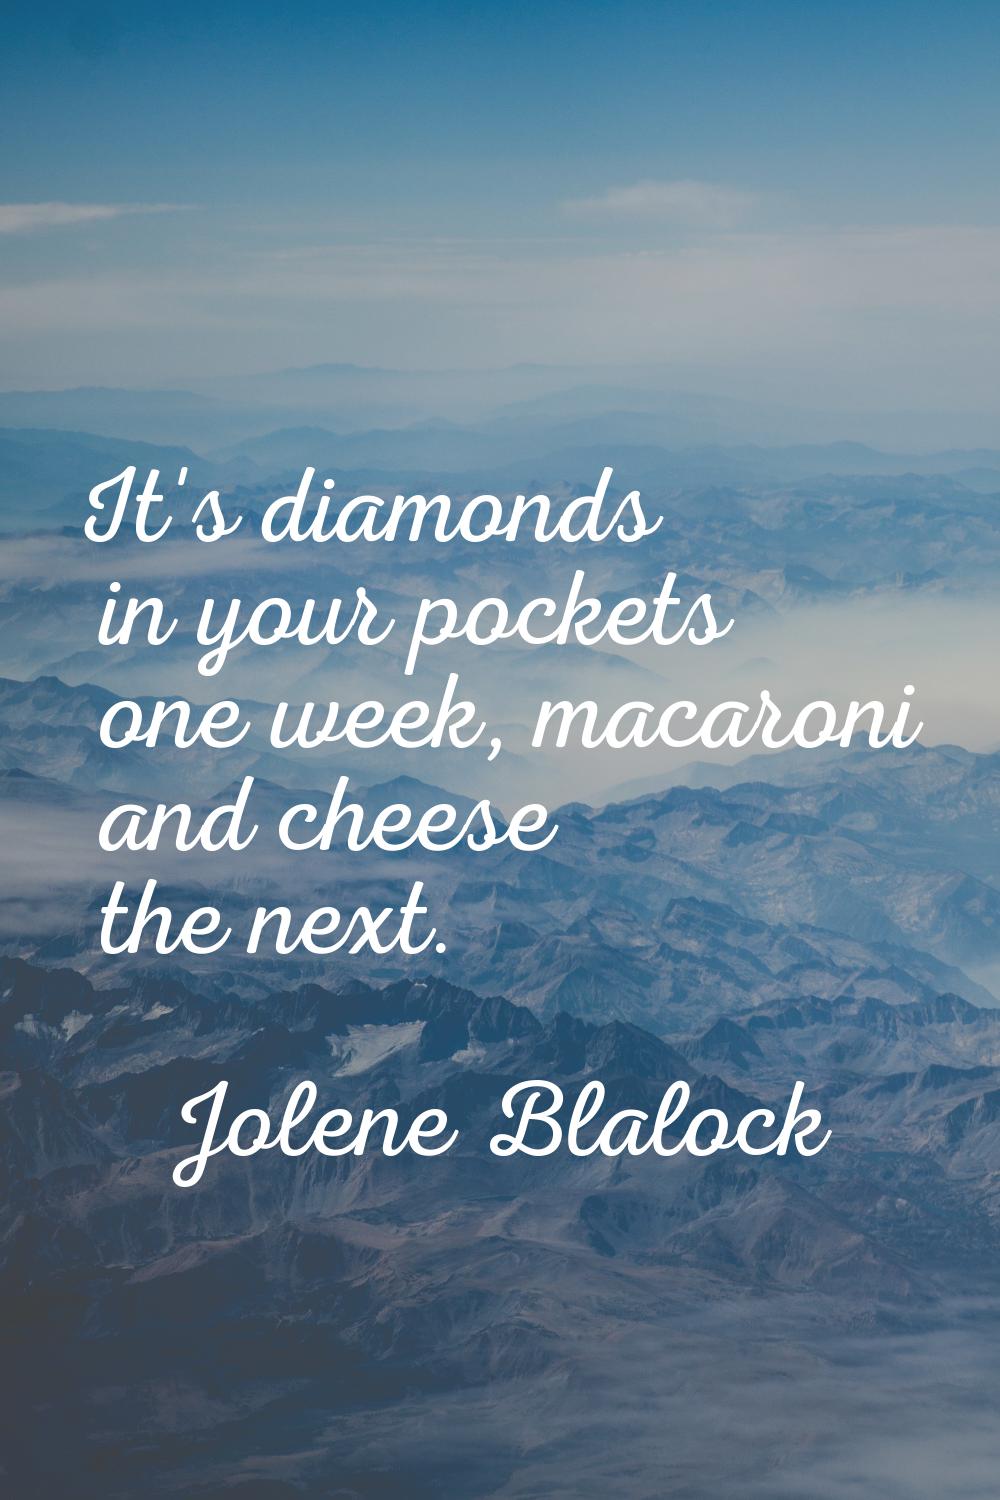 It's diamonds in your pockets one week, macaroni and cheese the next.